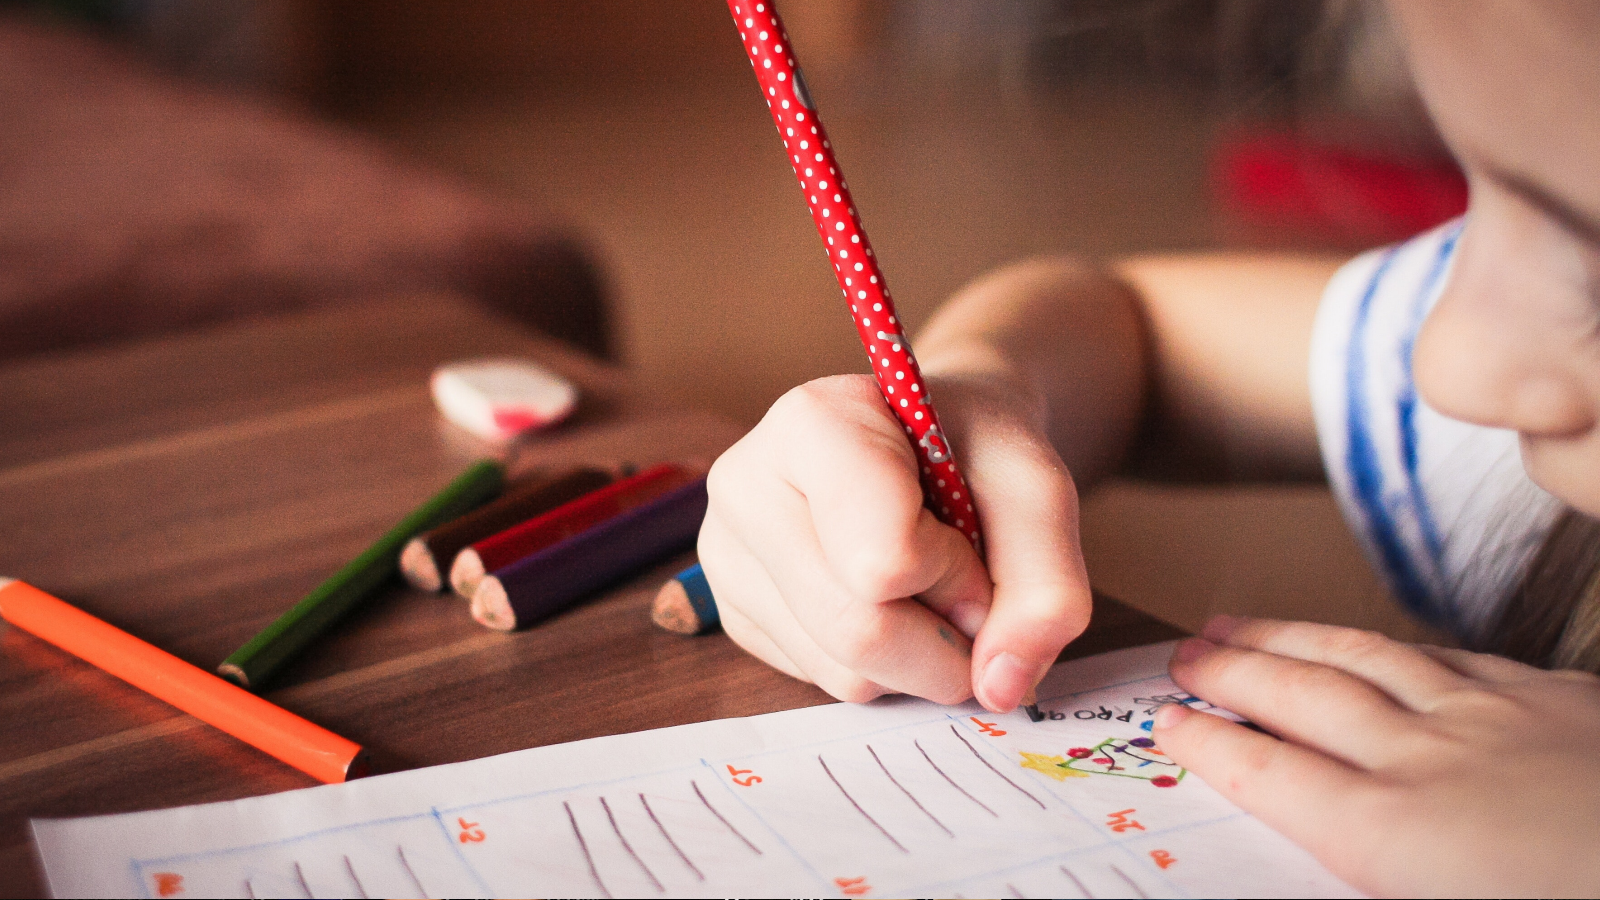 A child writes with a red pencil at a table.